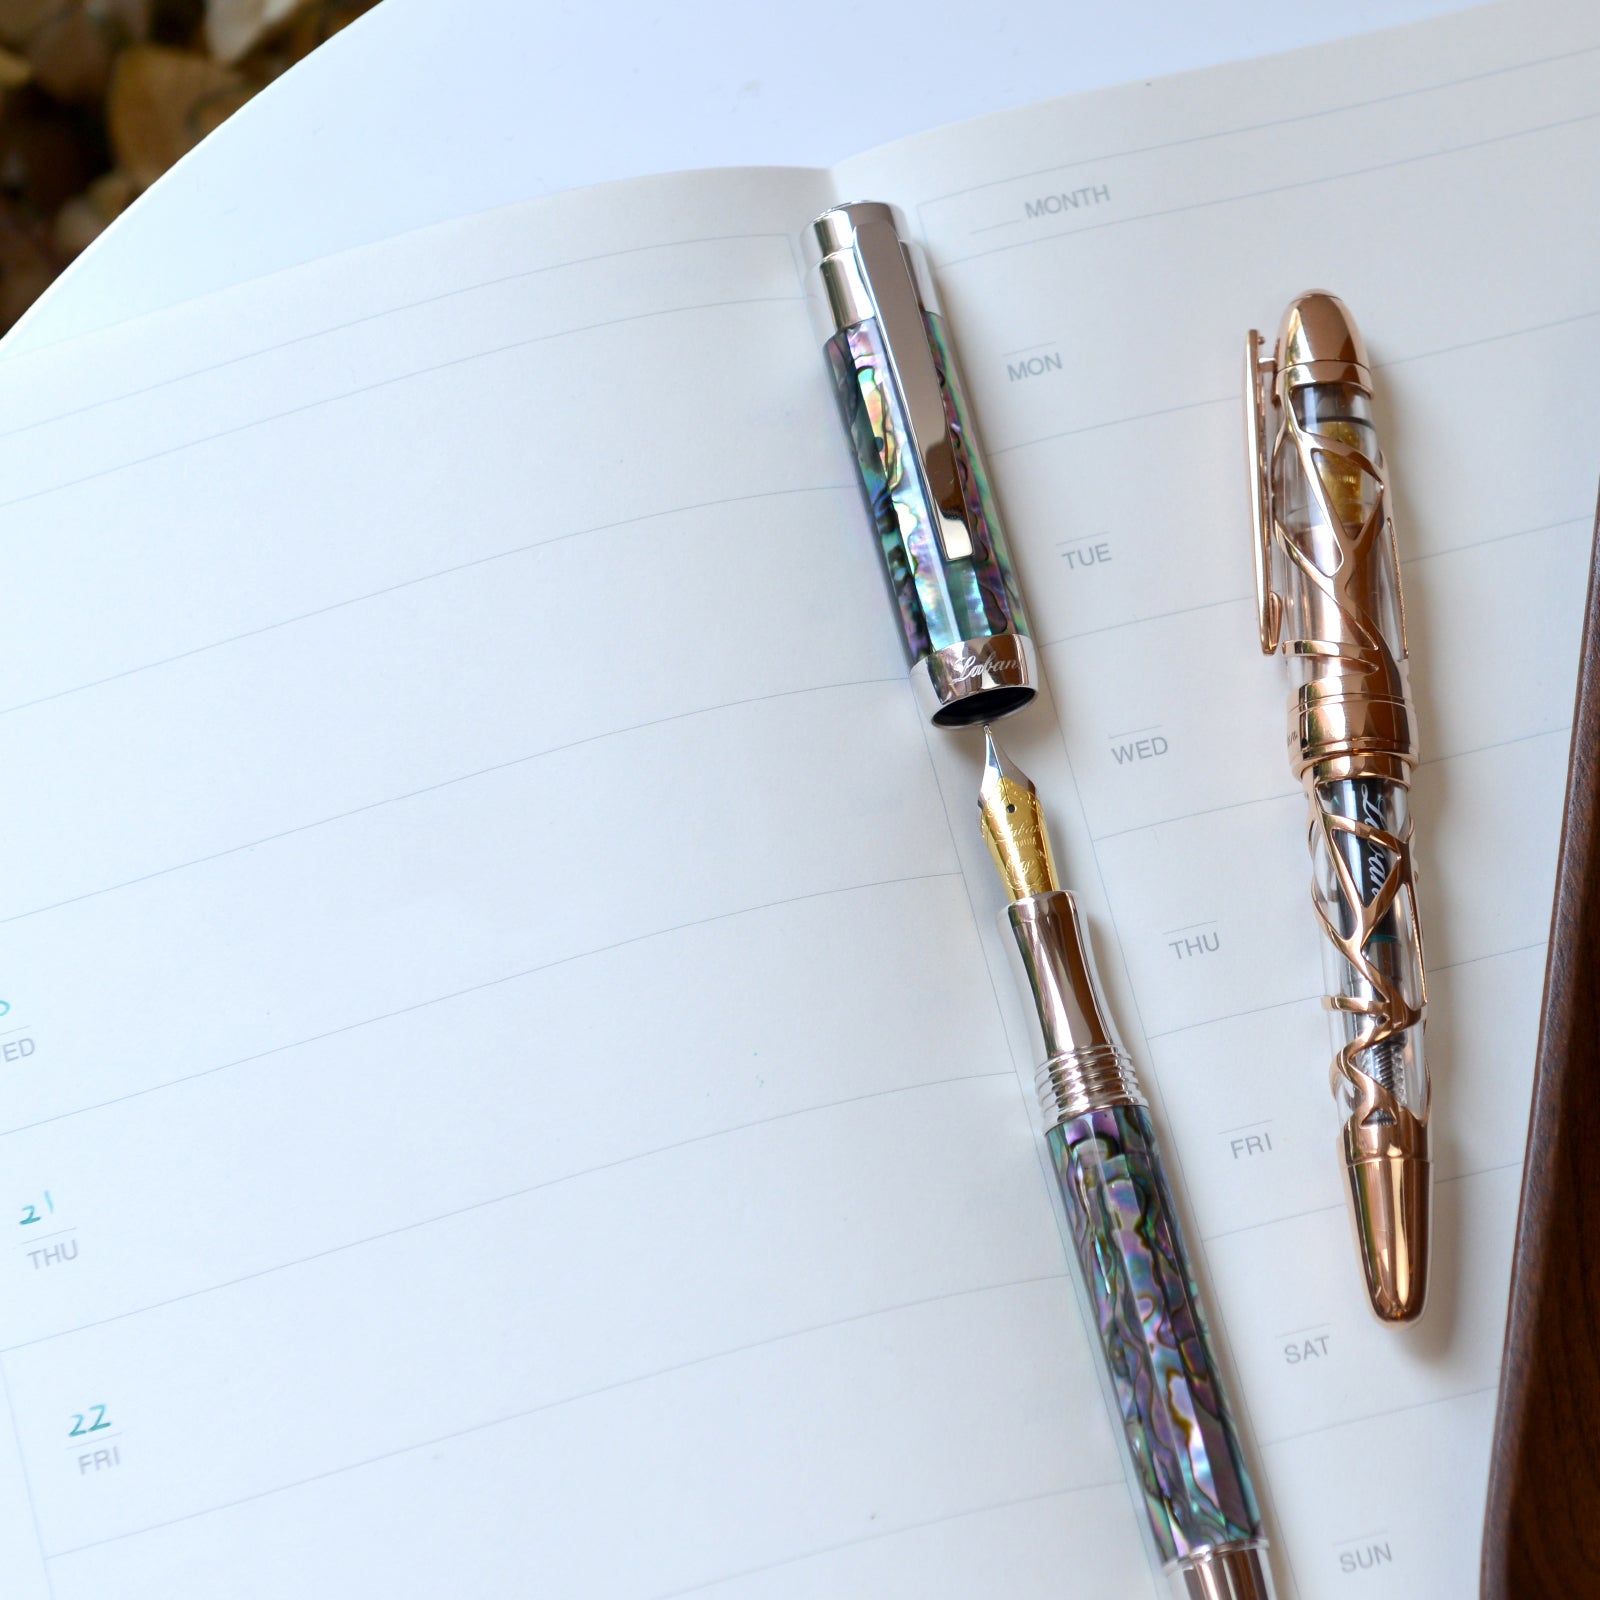 BEGINNER'S GUIDE TO LABAN FOUNTAIN PENS